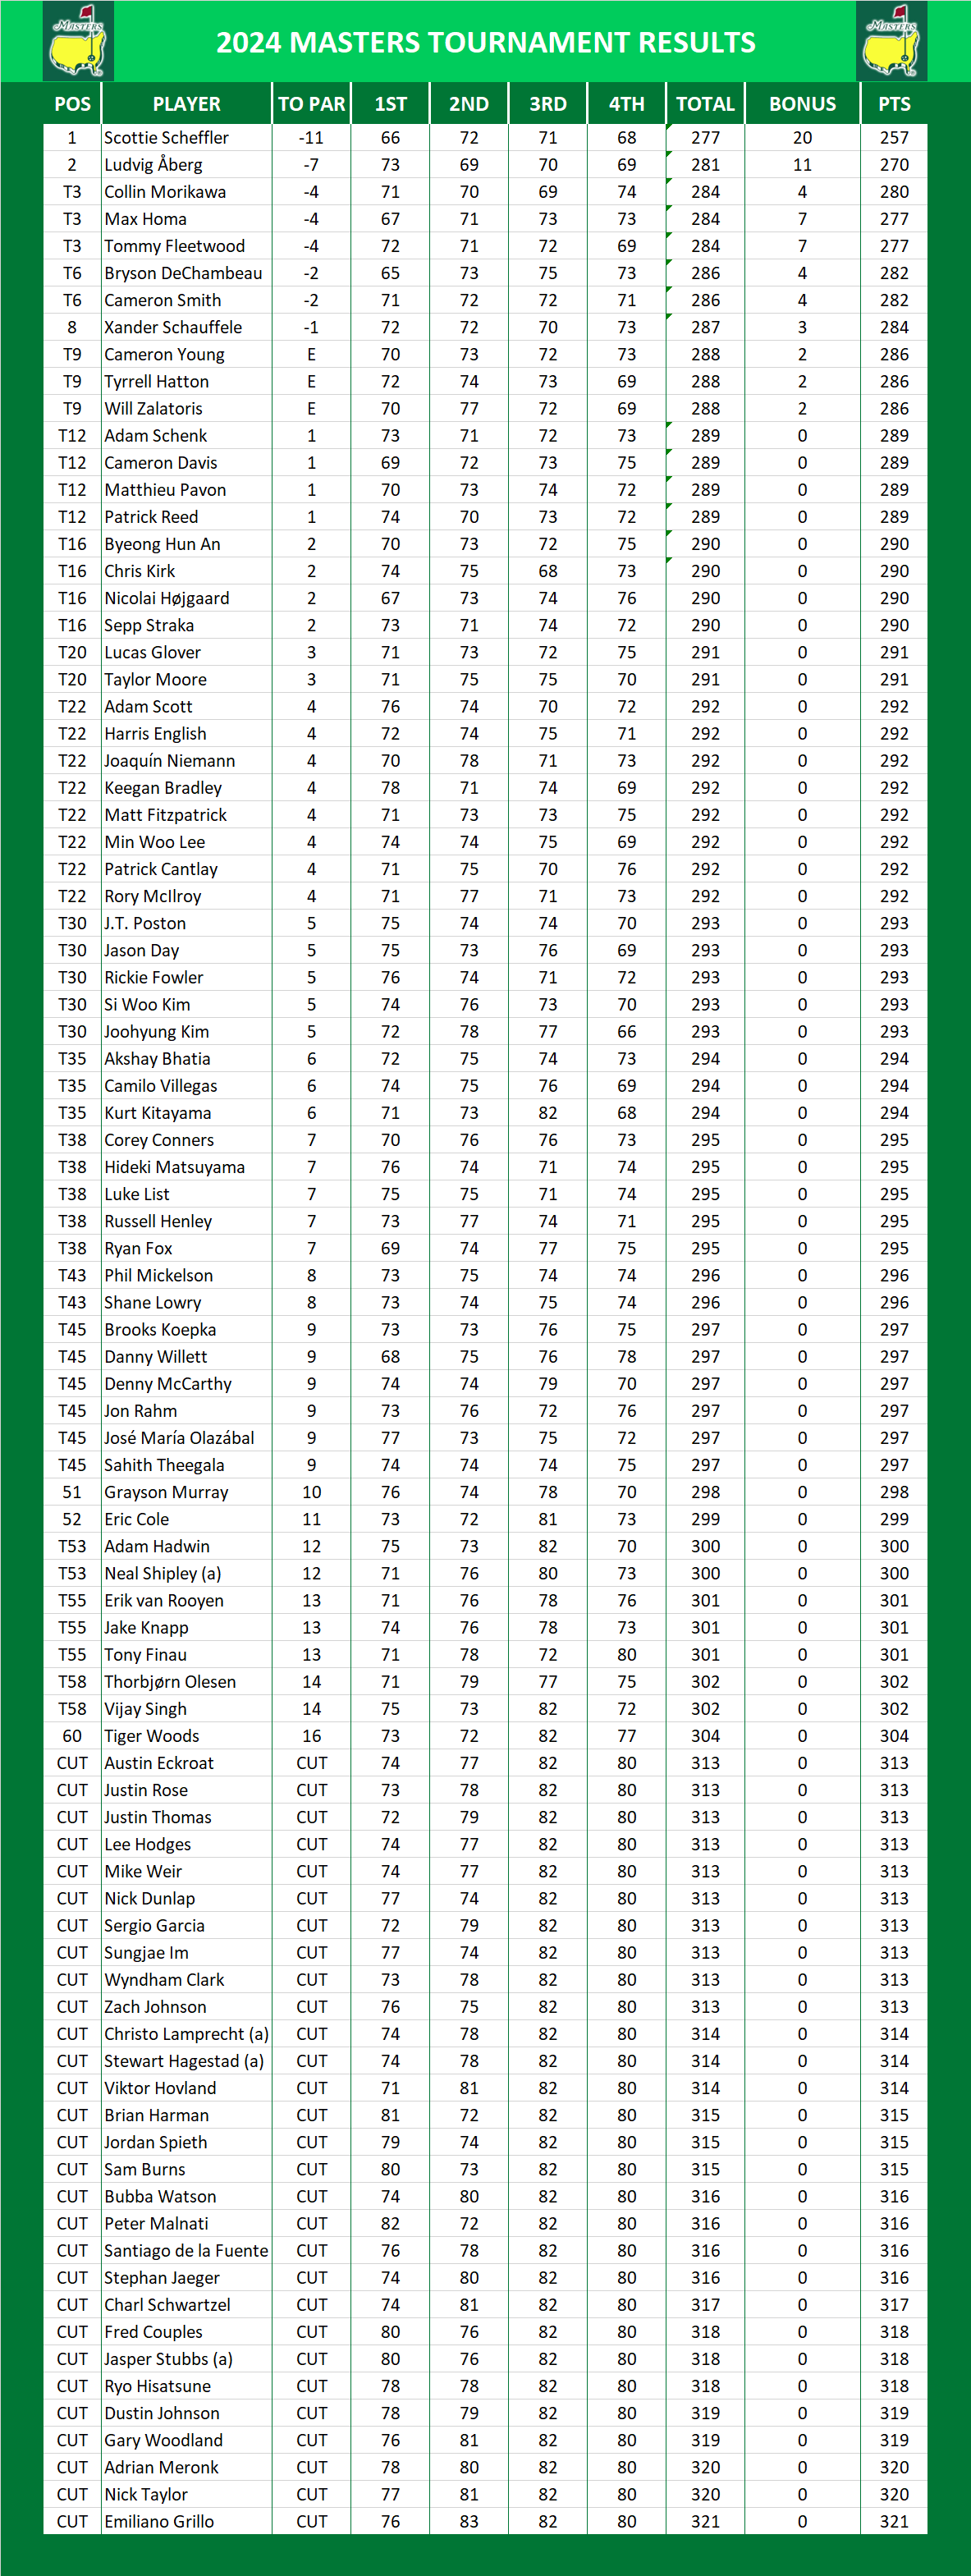 The Masters PGA Results